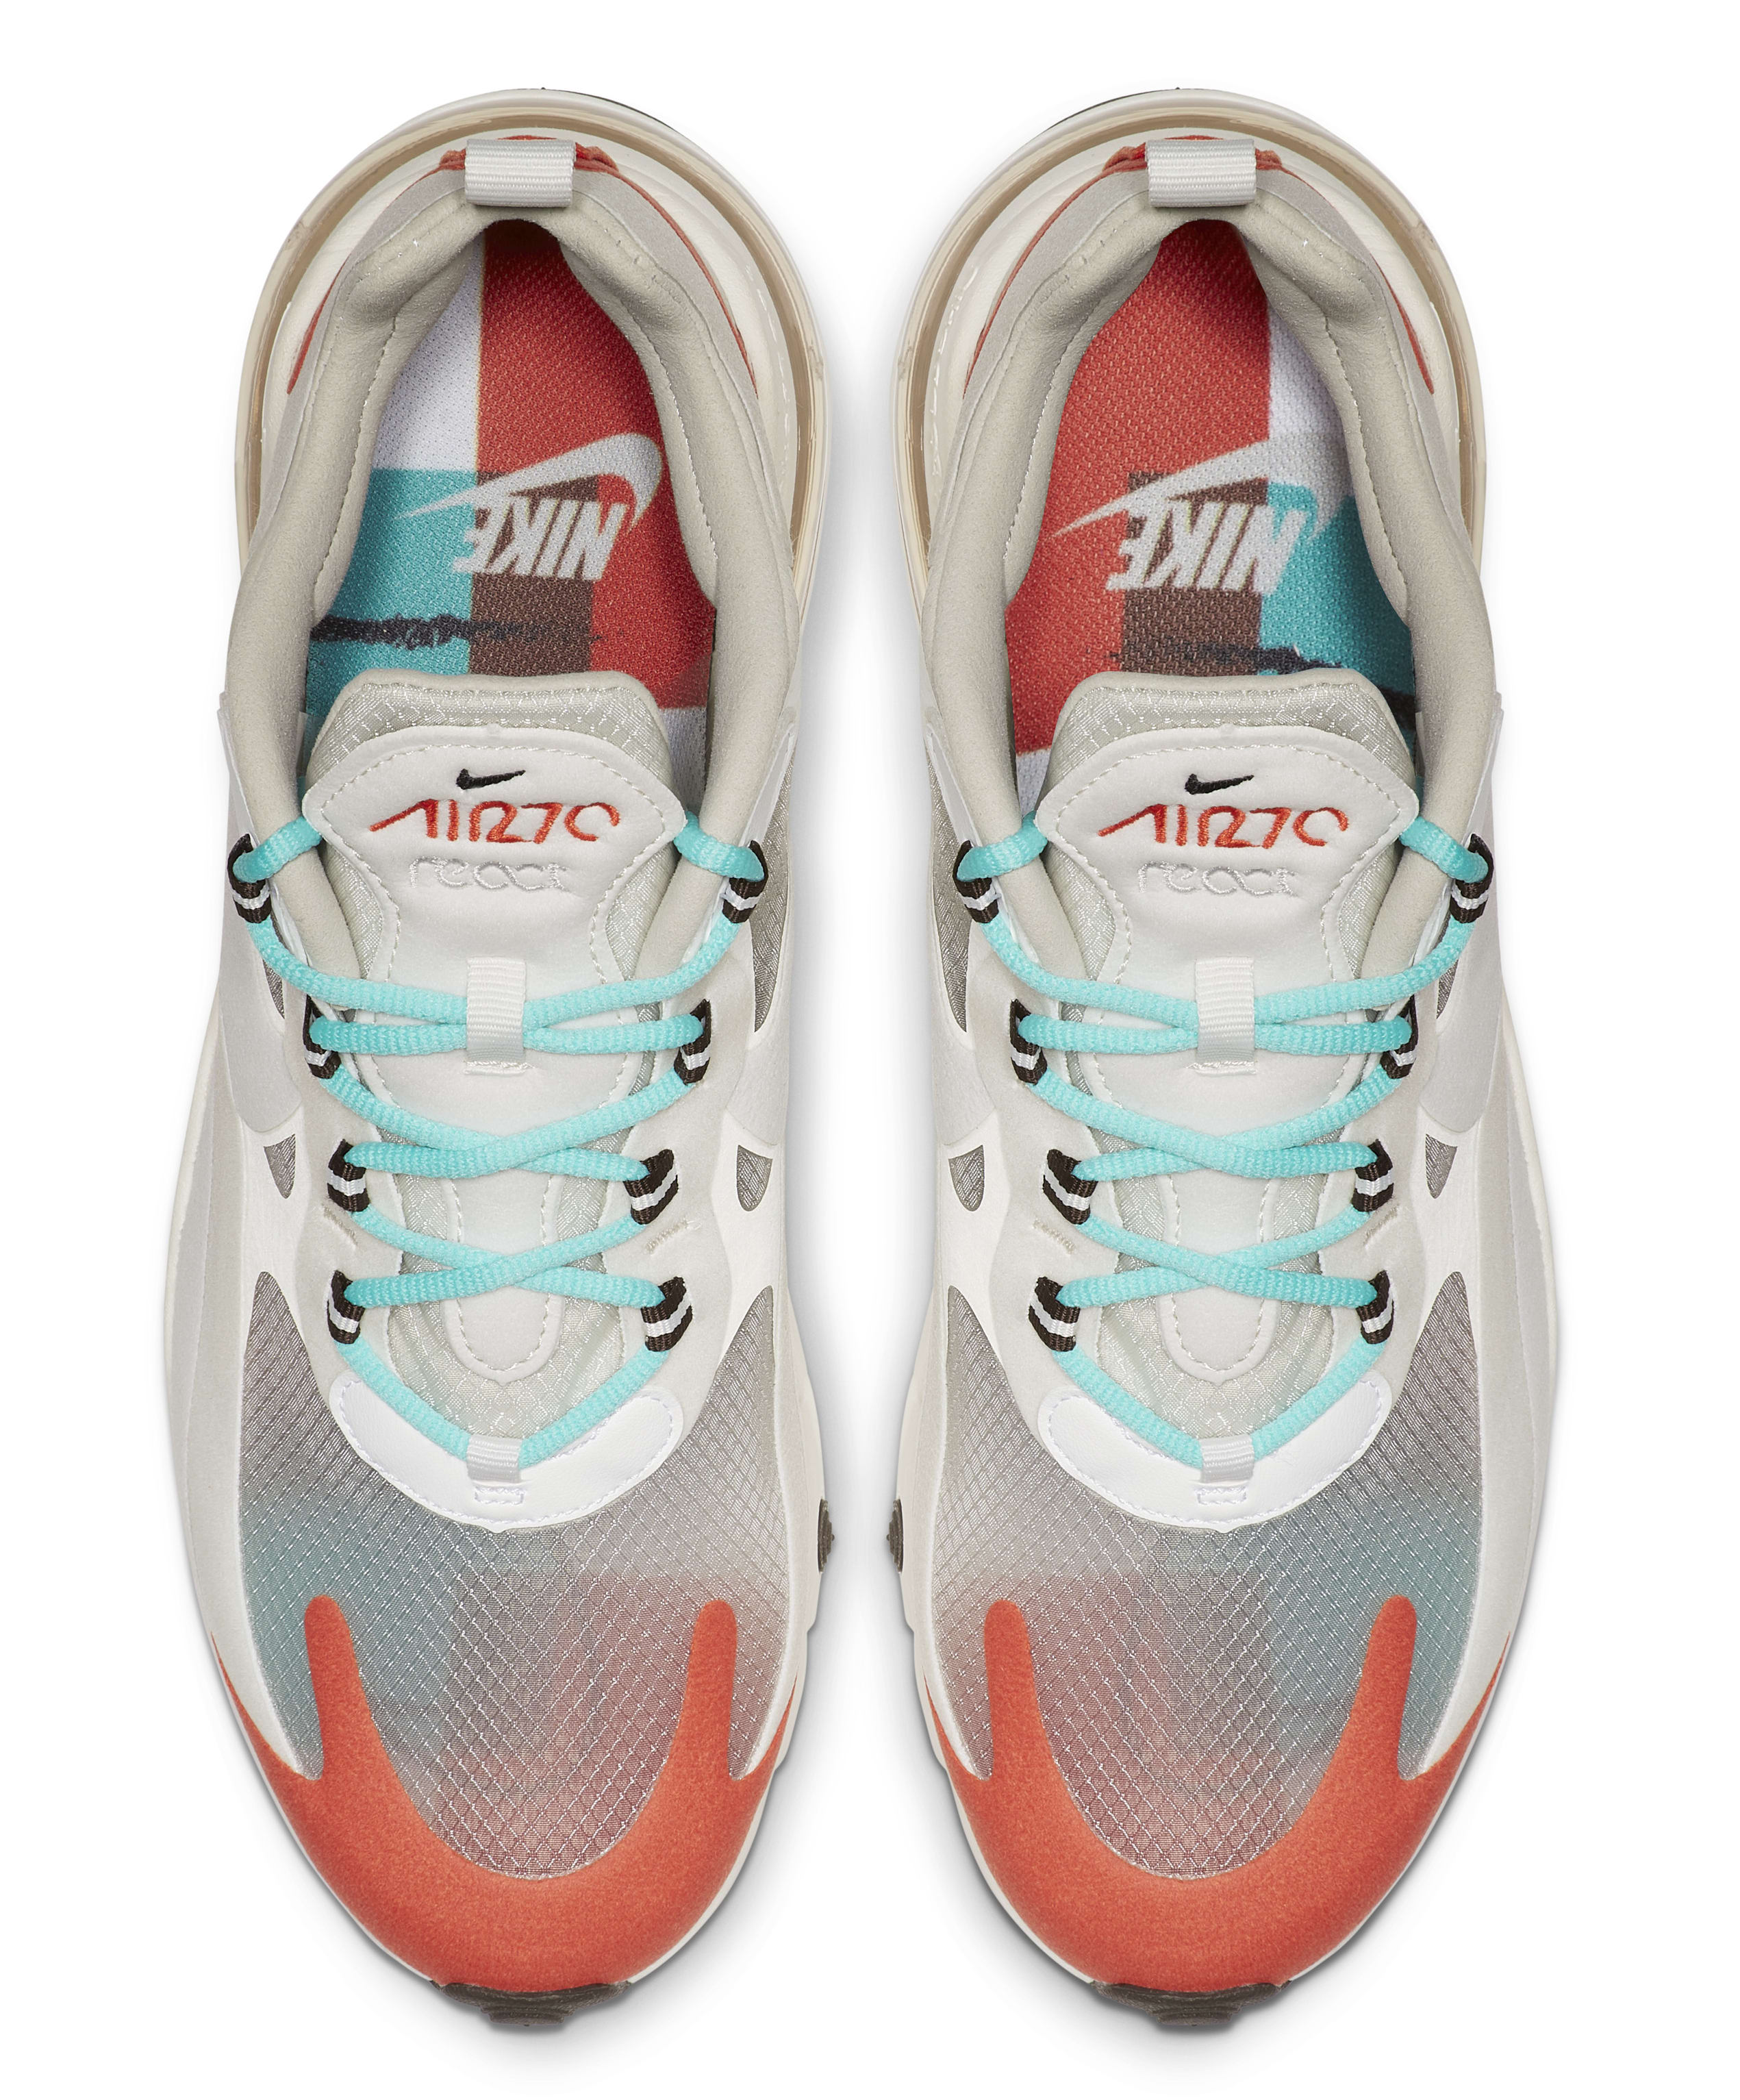 nike air max 270 react red white and blue